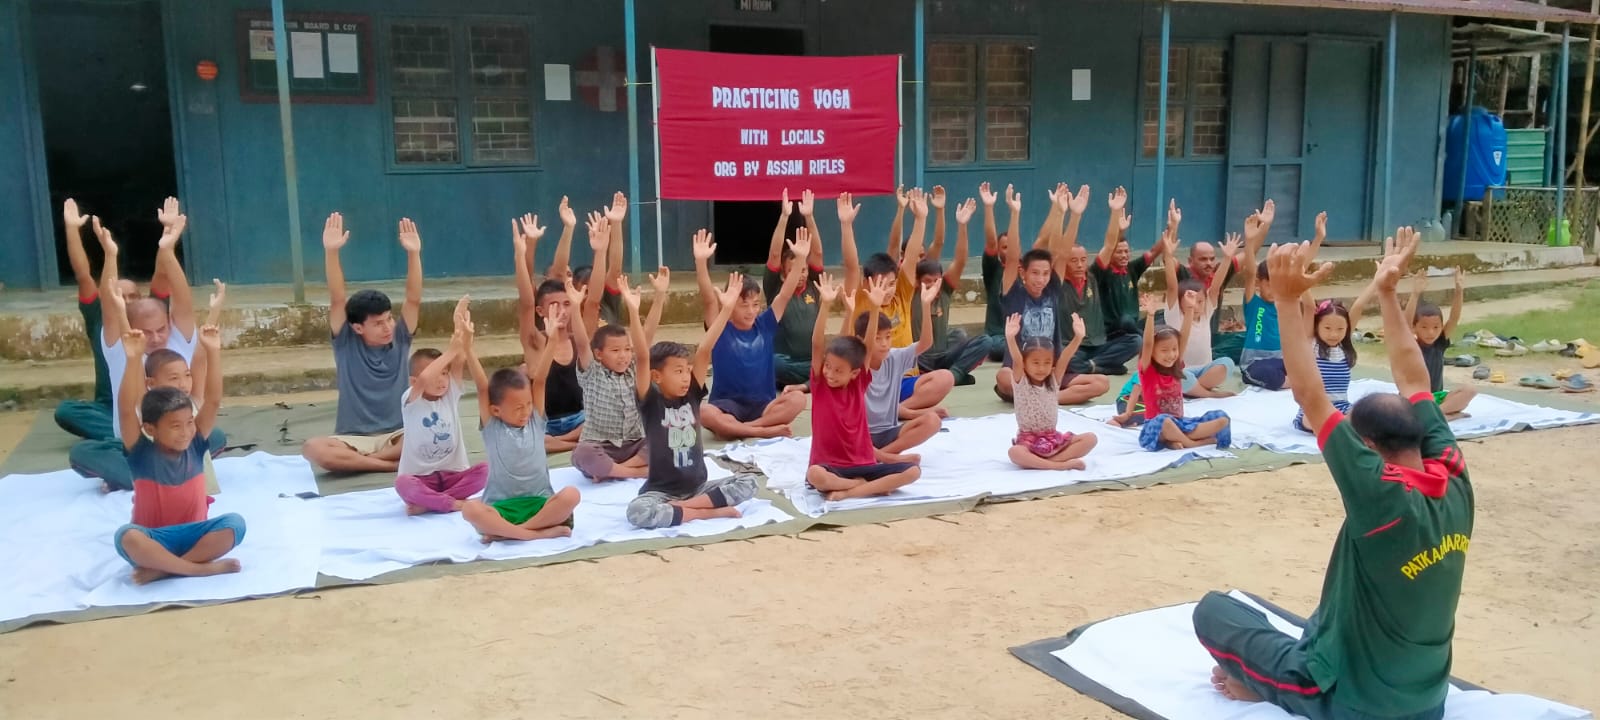 ASSAM RIFLES ORGANISED ‘PRACTICING YOGA WITH LOCALS’ IN NEW KAIPHUNDAI, TAMENGLONG DISTRICT, MANIPUR